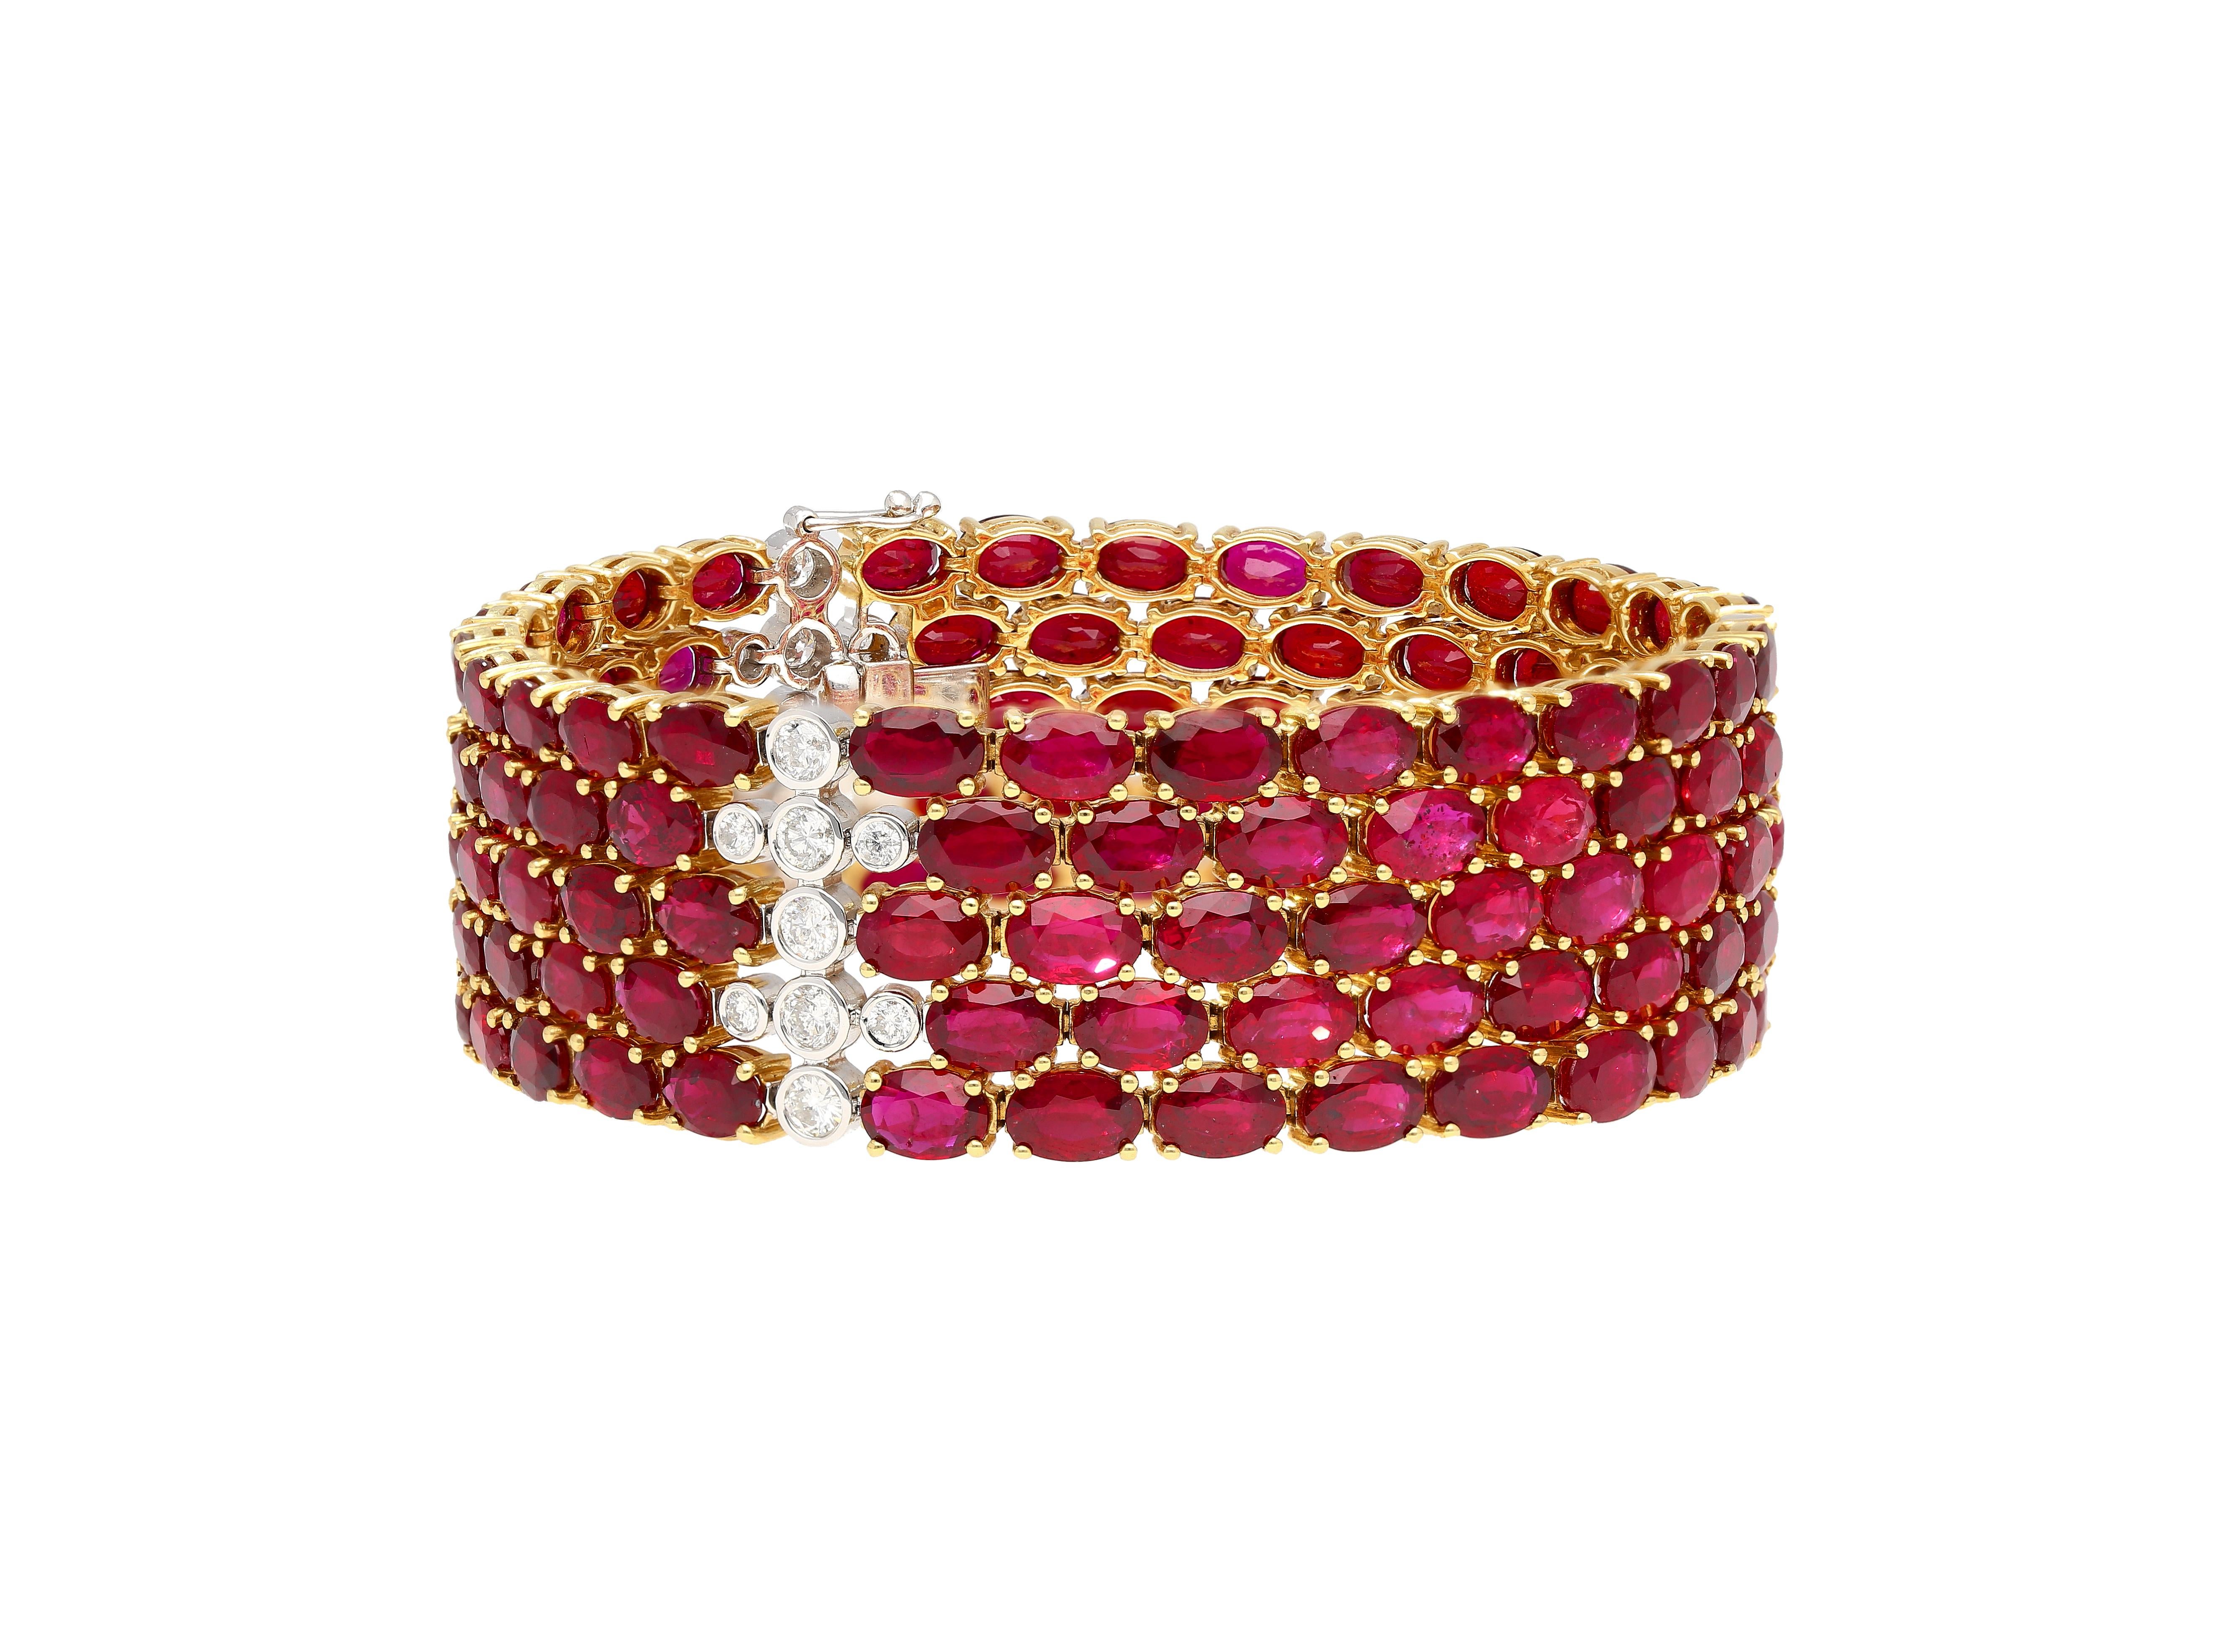 Art Deco 72.51 Carat Natural Oval Cut Ruby and Diamond 5-Row Multi Link 18K Gold Bracelet For Sale